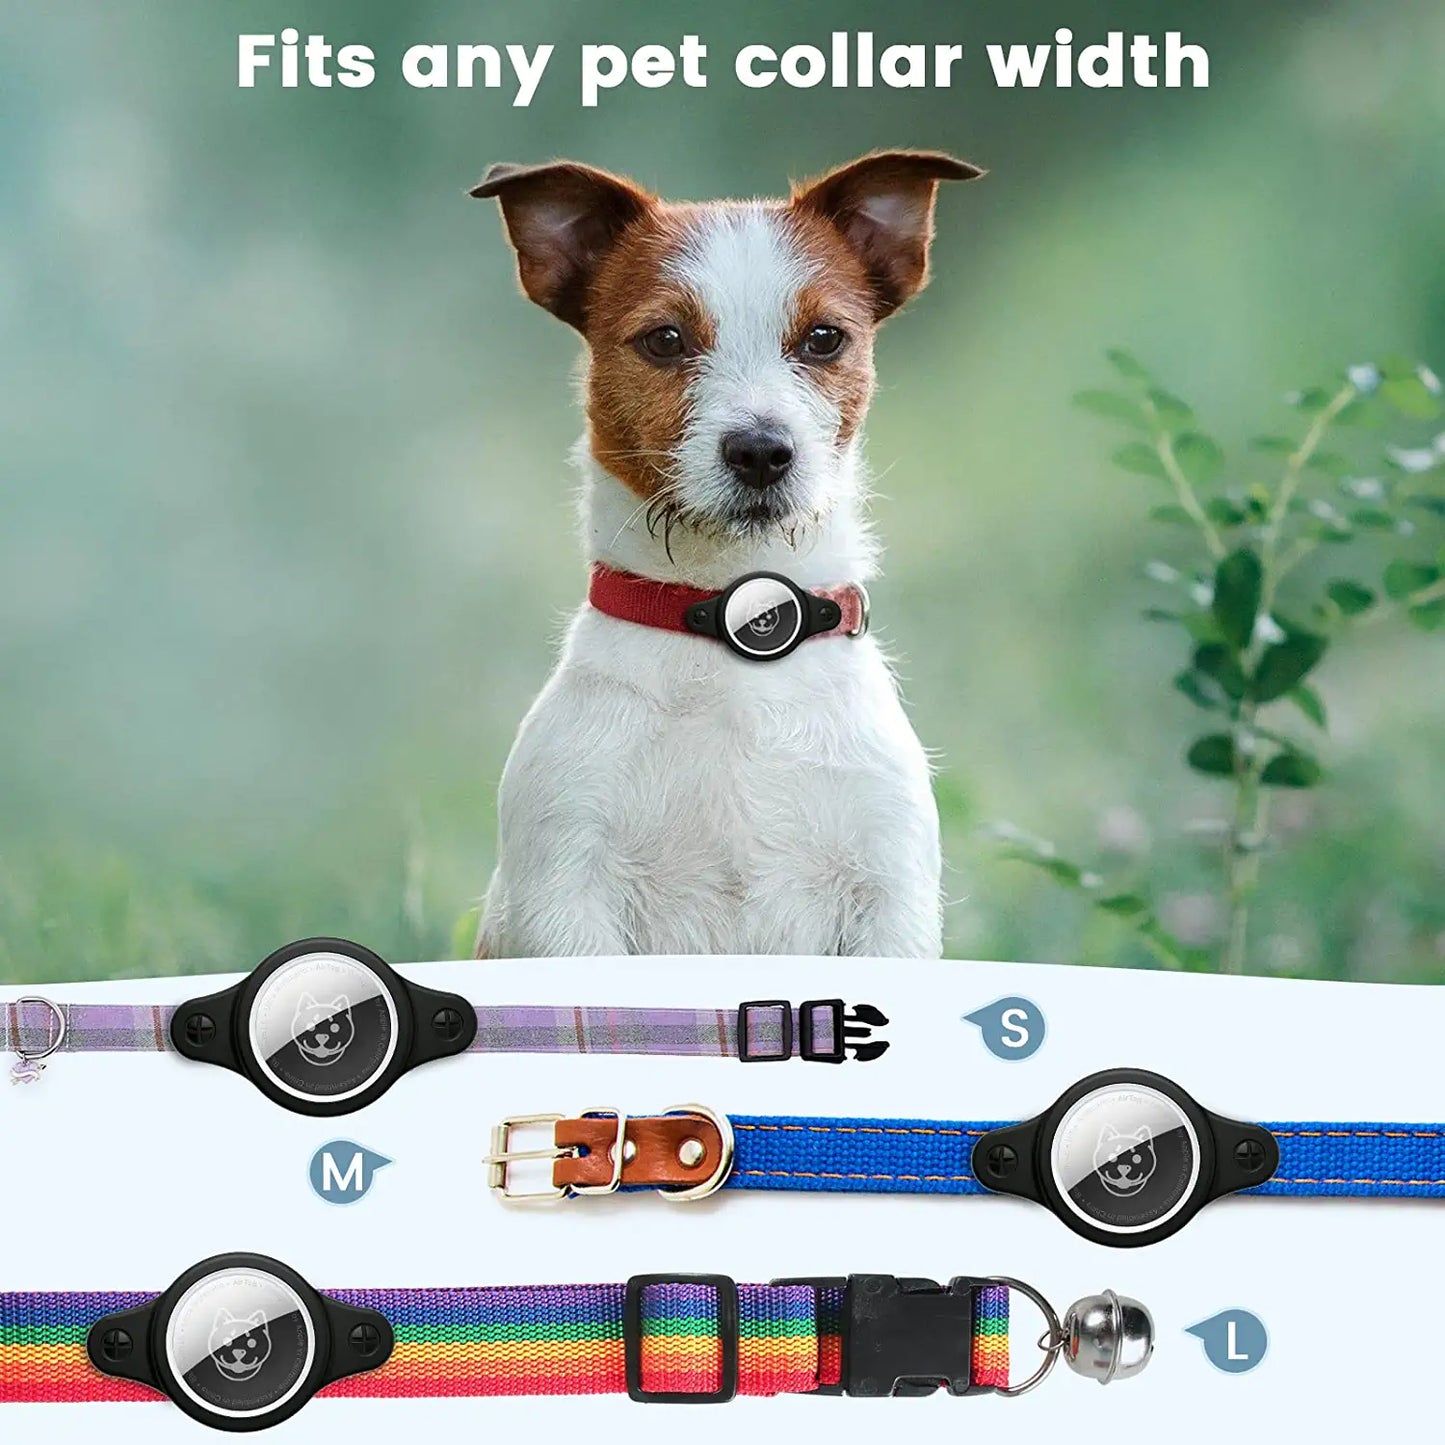 Airtag Holder for Dog Collar, Airtag Dog Collar Holder Compatible with Apple Airtags, Waterproof Airtag Case for Dogs, Anti-Lost Airtag Case Fits All Width Collars